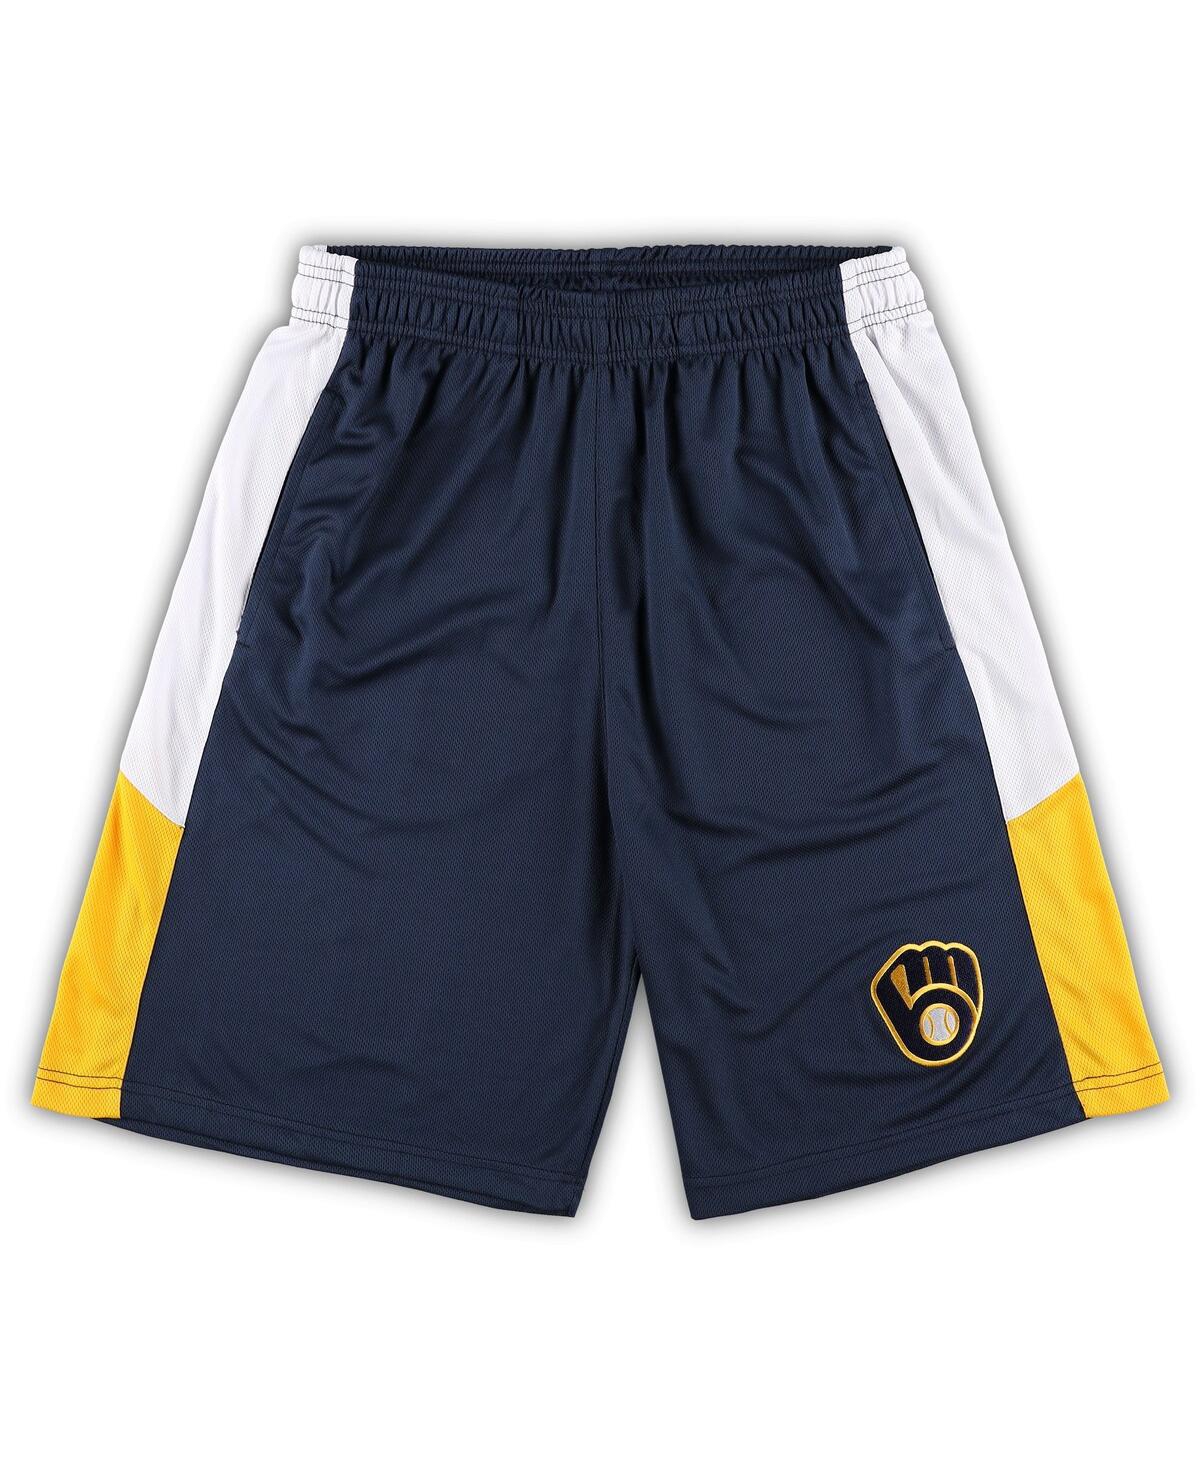 PROFILE MEN'S NAVY MILWAUKEE BREWERS BIG AND TALL TEAM SHORTS